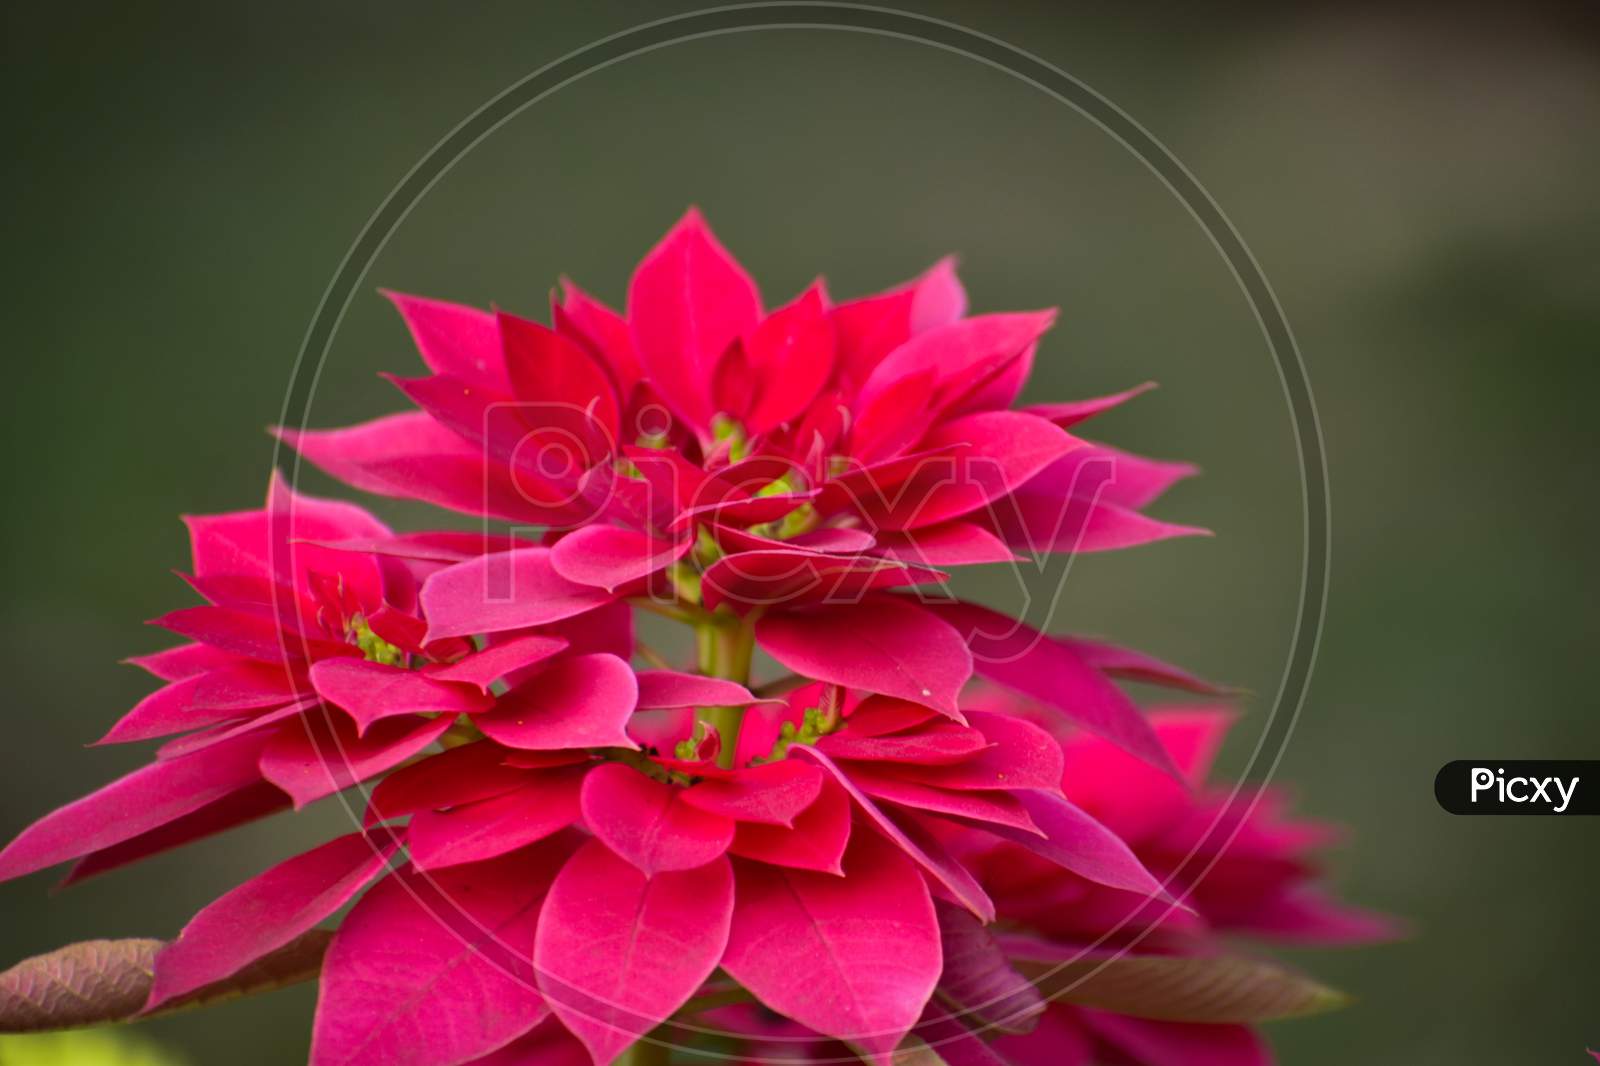 A Close Up Of Pink And Red Poinsettia Flowers. Close-Up Red Flowers Of Early Winter